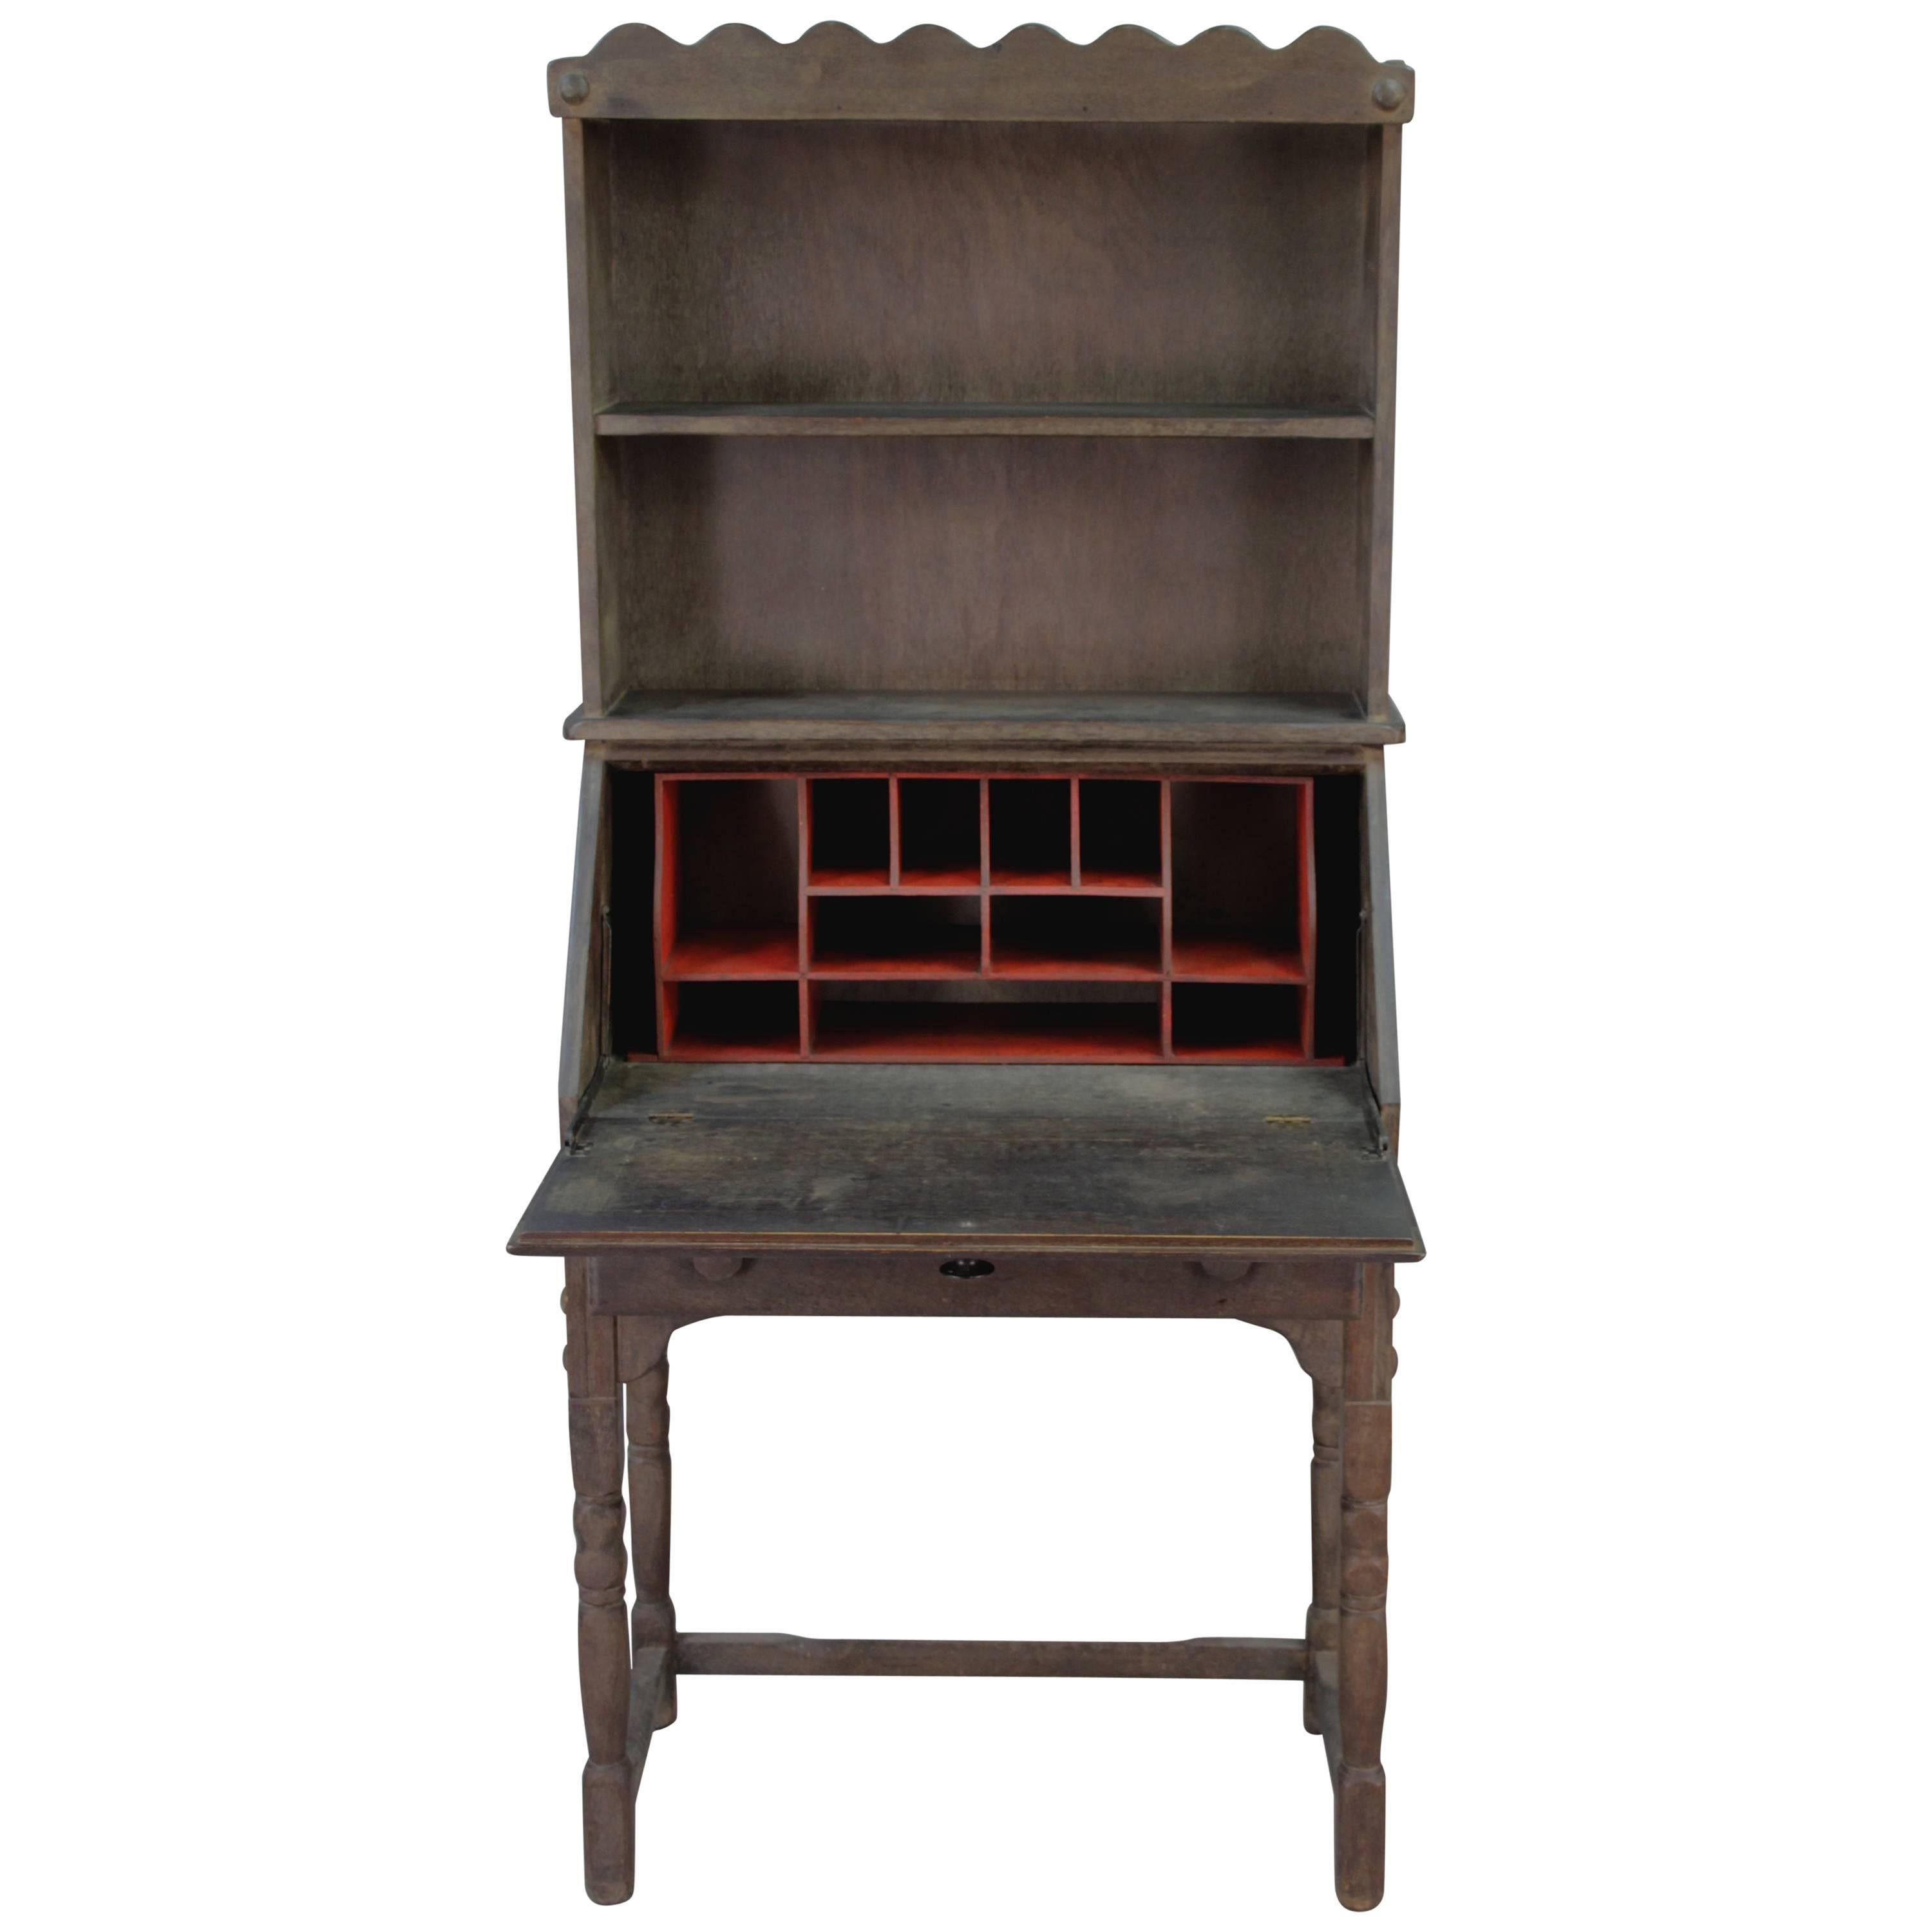 1930s Red and Old Wood Finish Monterey Hutch with Fold Down Desk